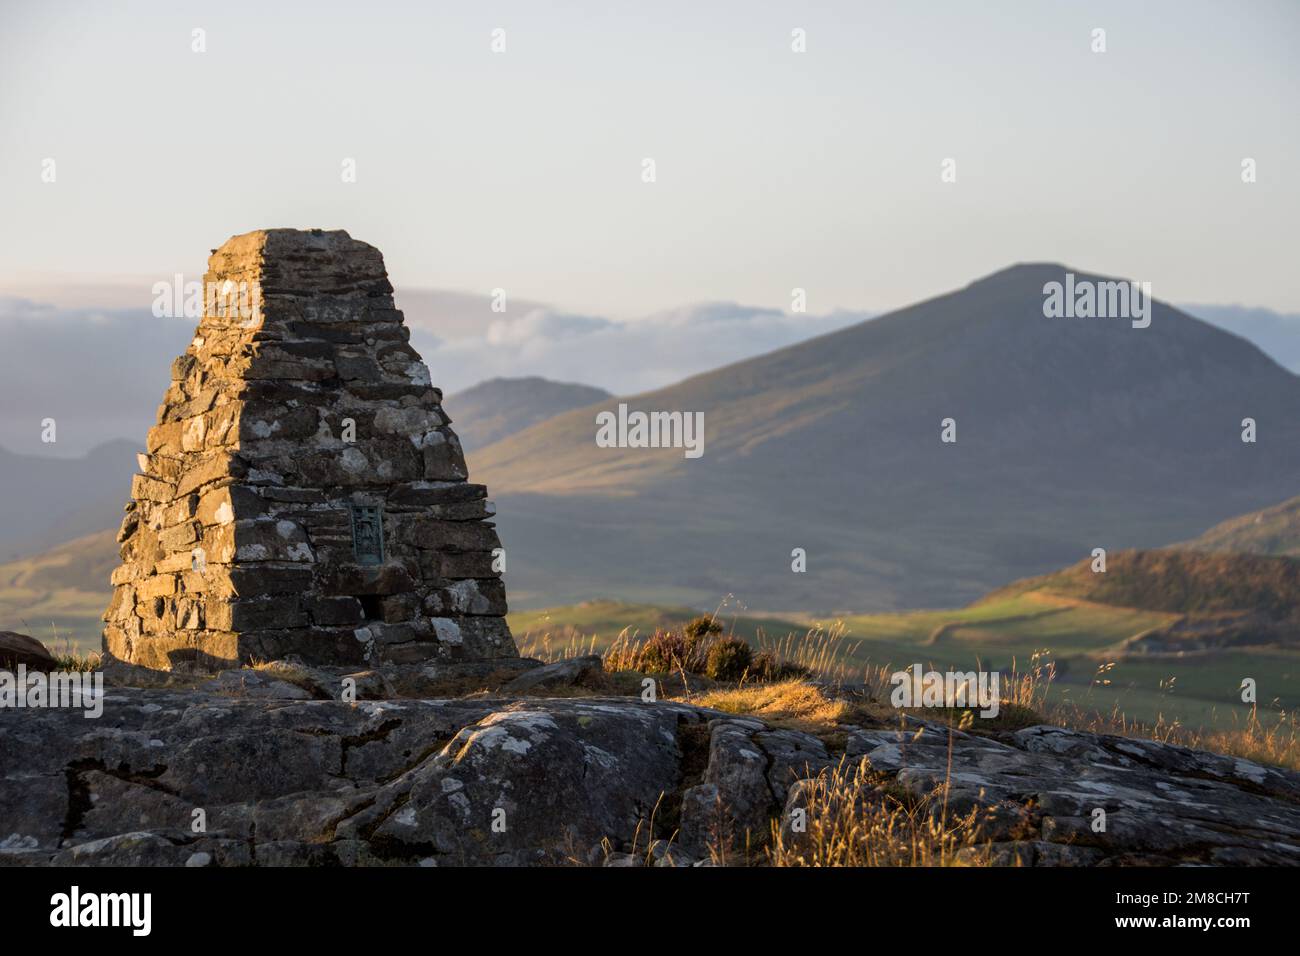 A view across to Moel Hebog mountain from Moel y Gest summit cairn, Porthmadog, North Wales, UK Stock Photo